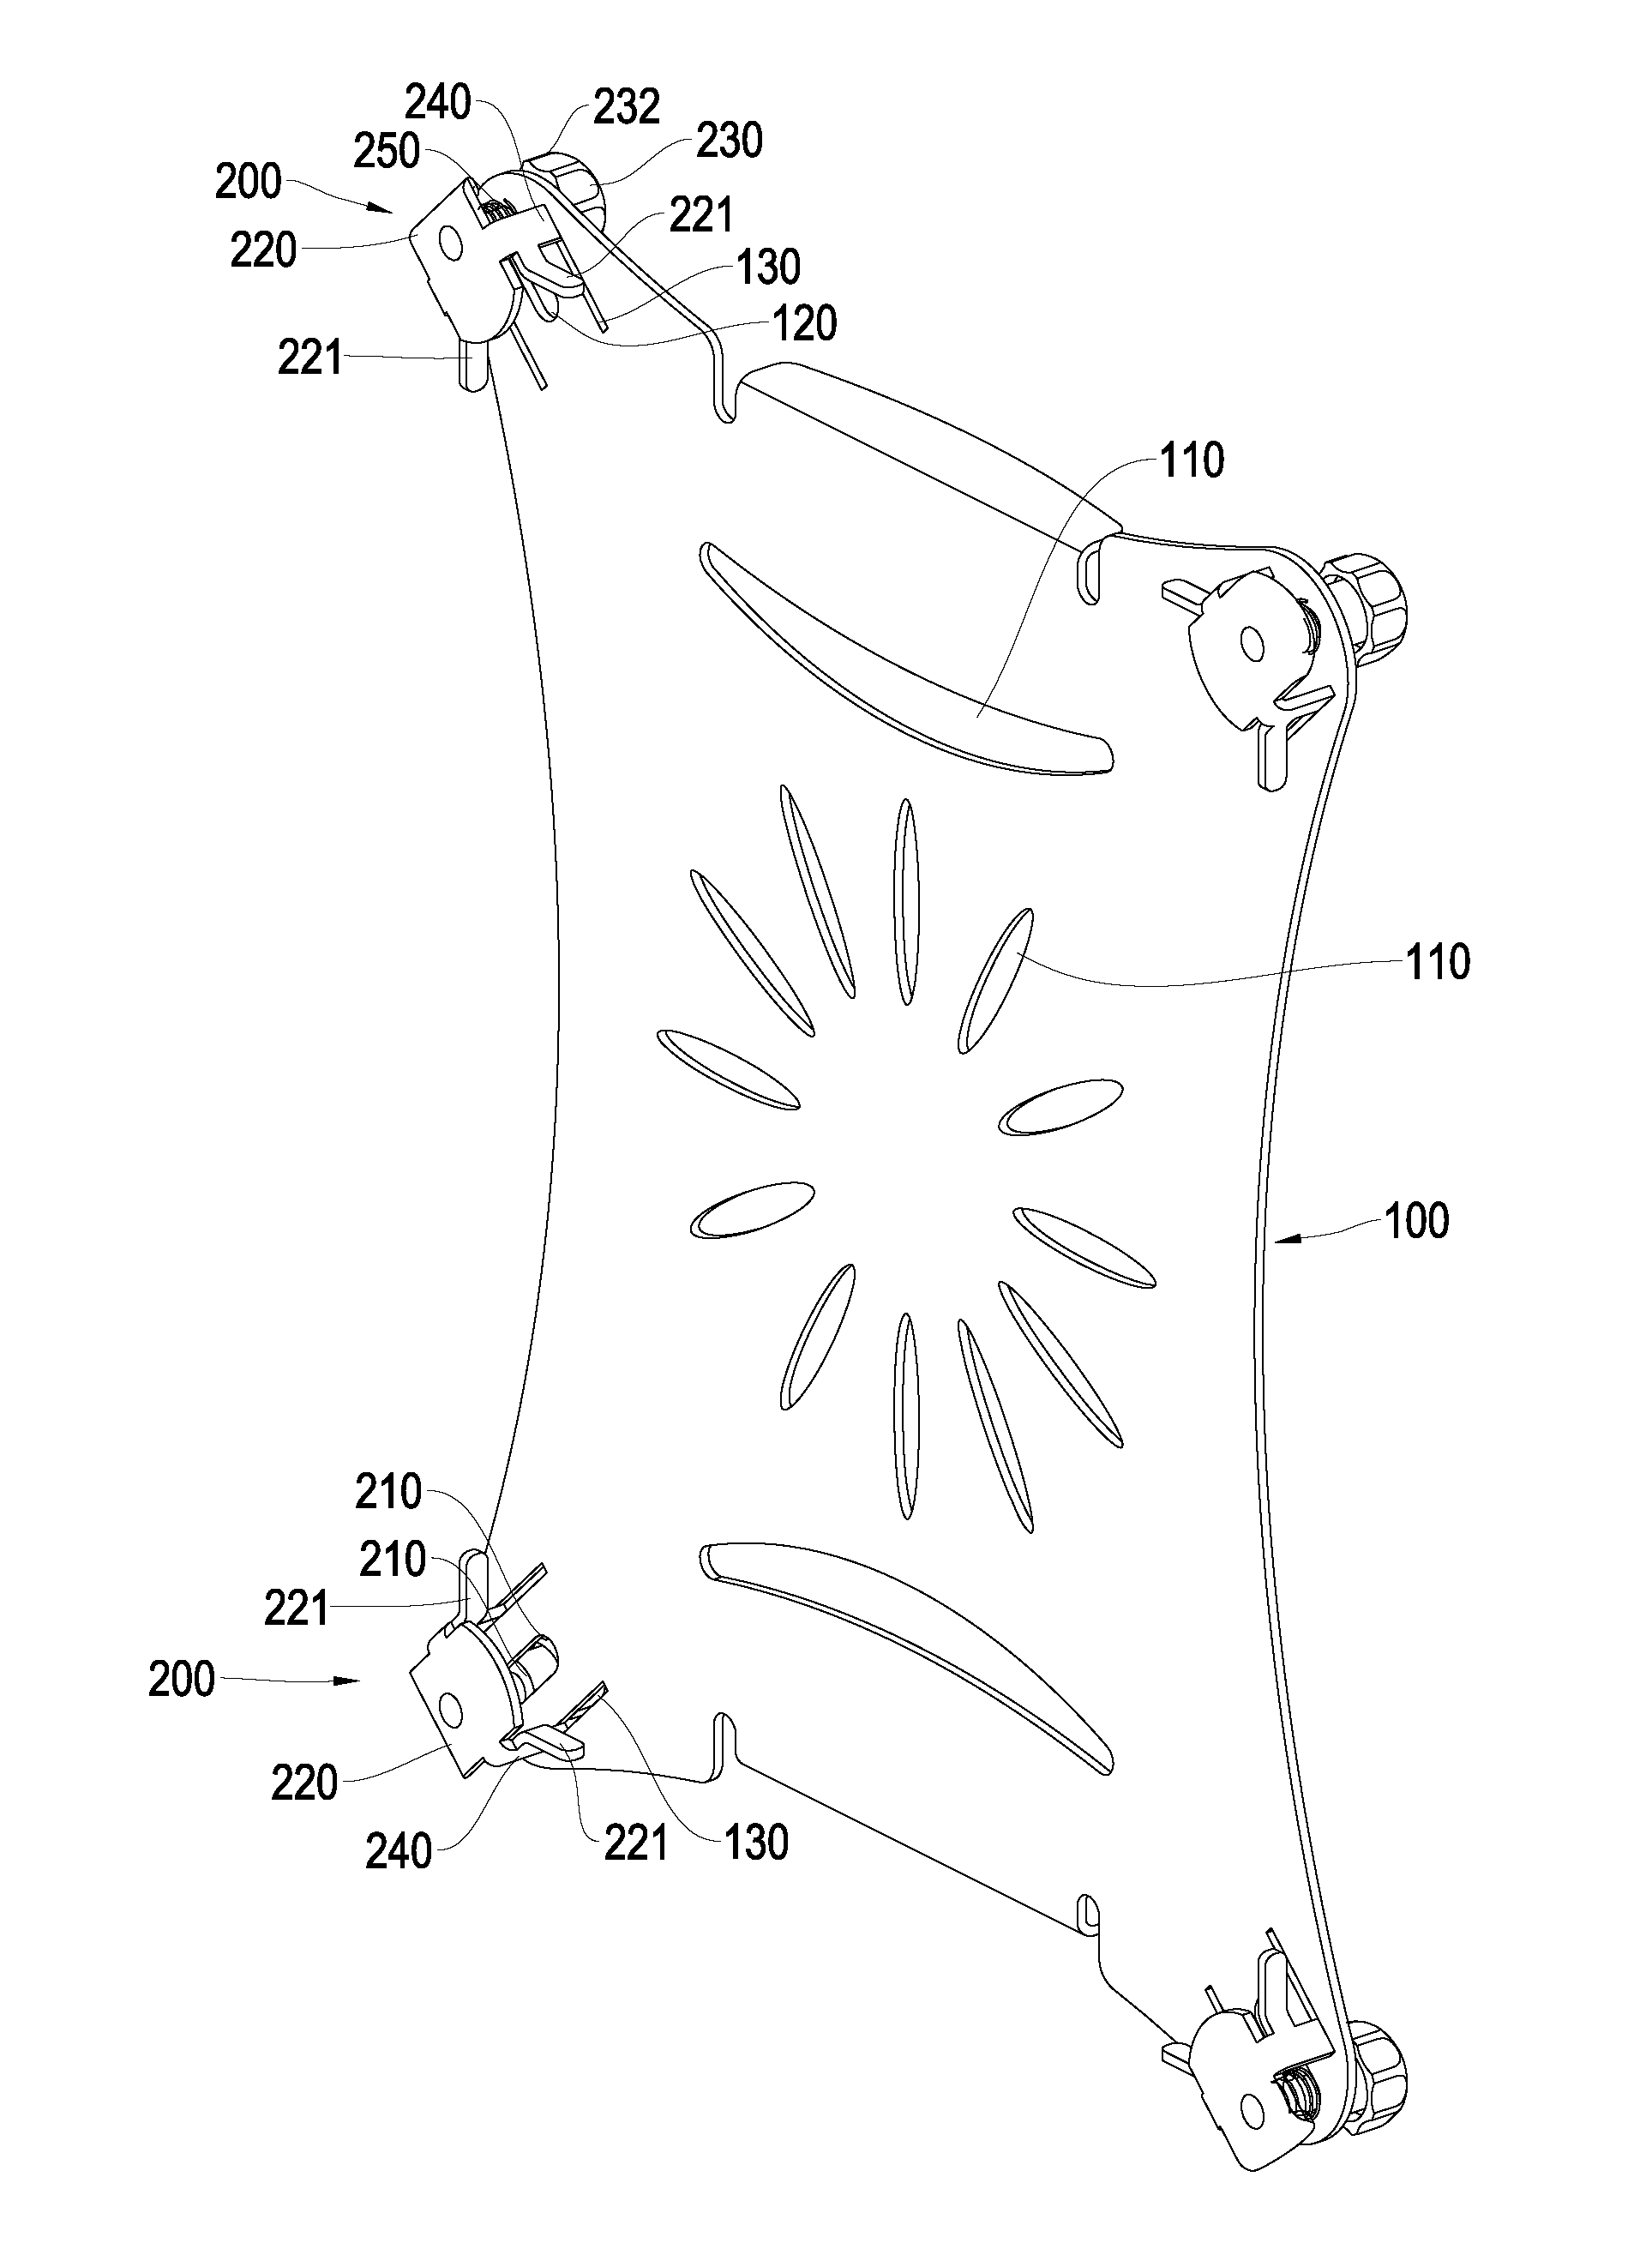 Holder for handheld electronic device